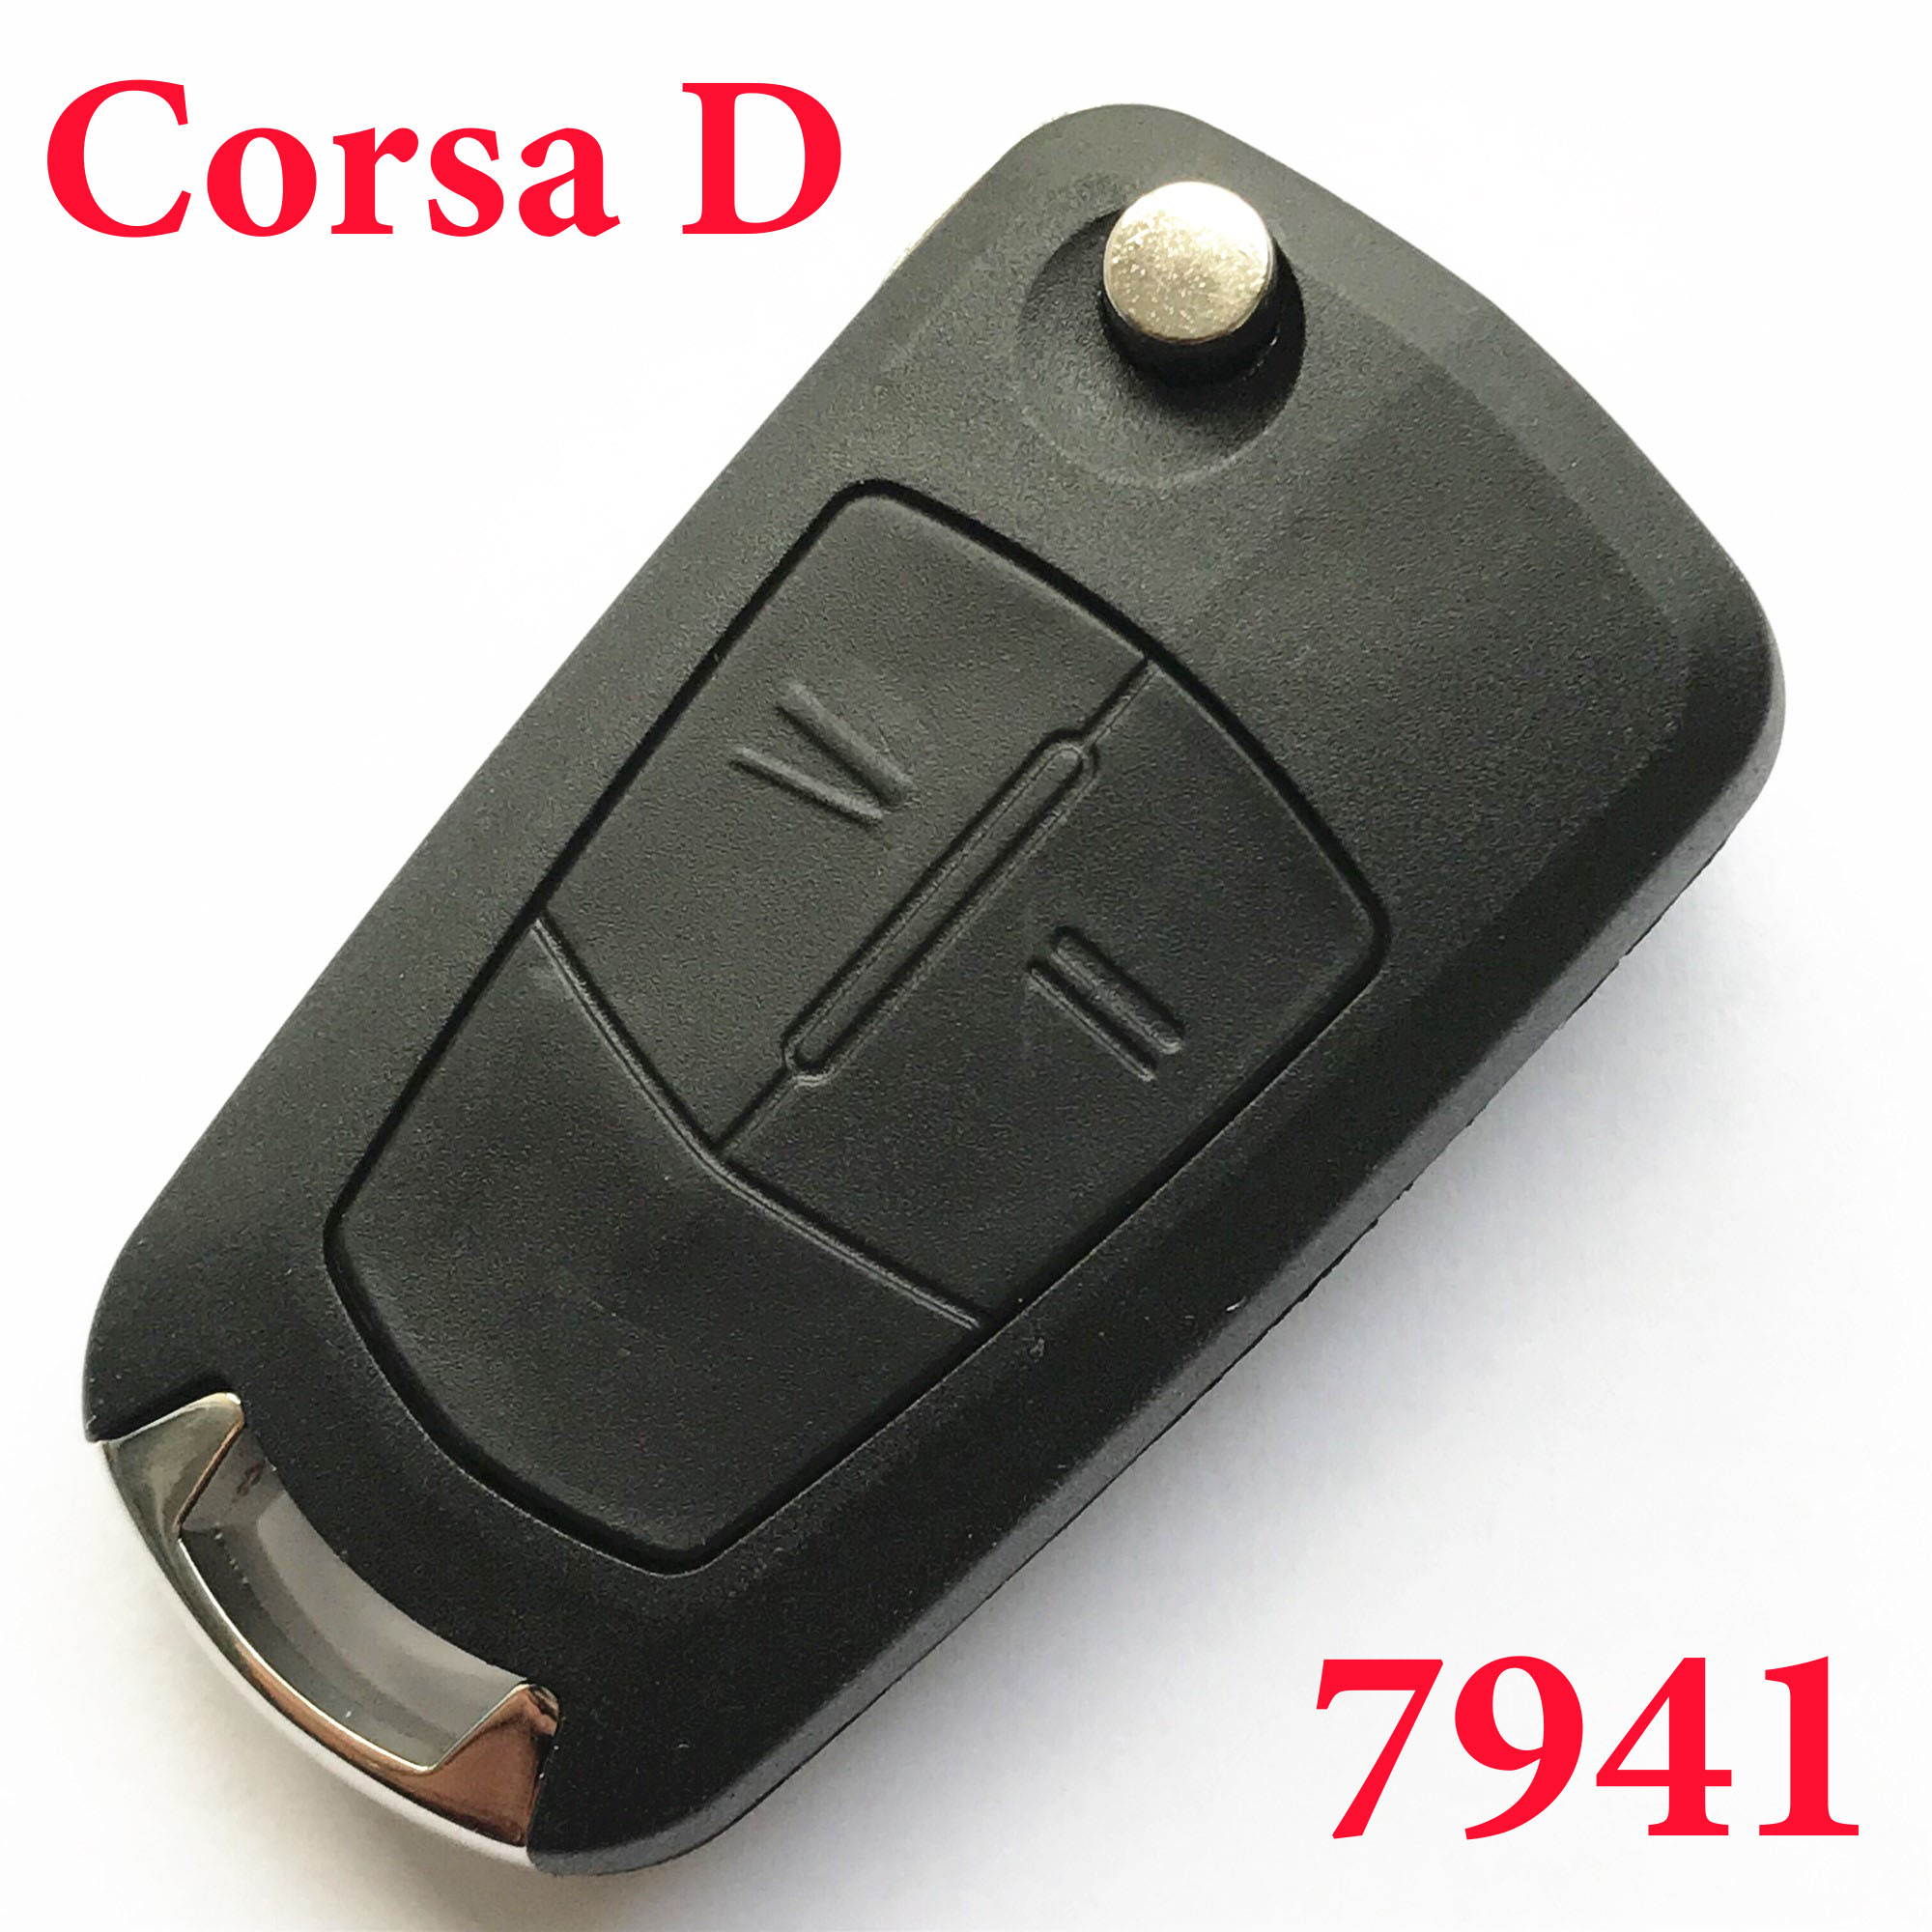 2 Buttons 434 MHz Flip Remote Key for Opel Corsa D Meriva - PCF7941